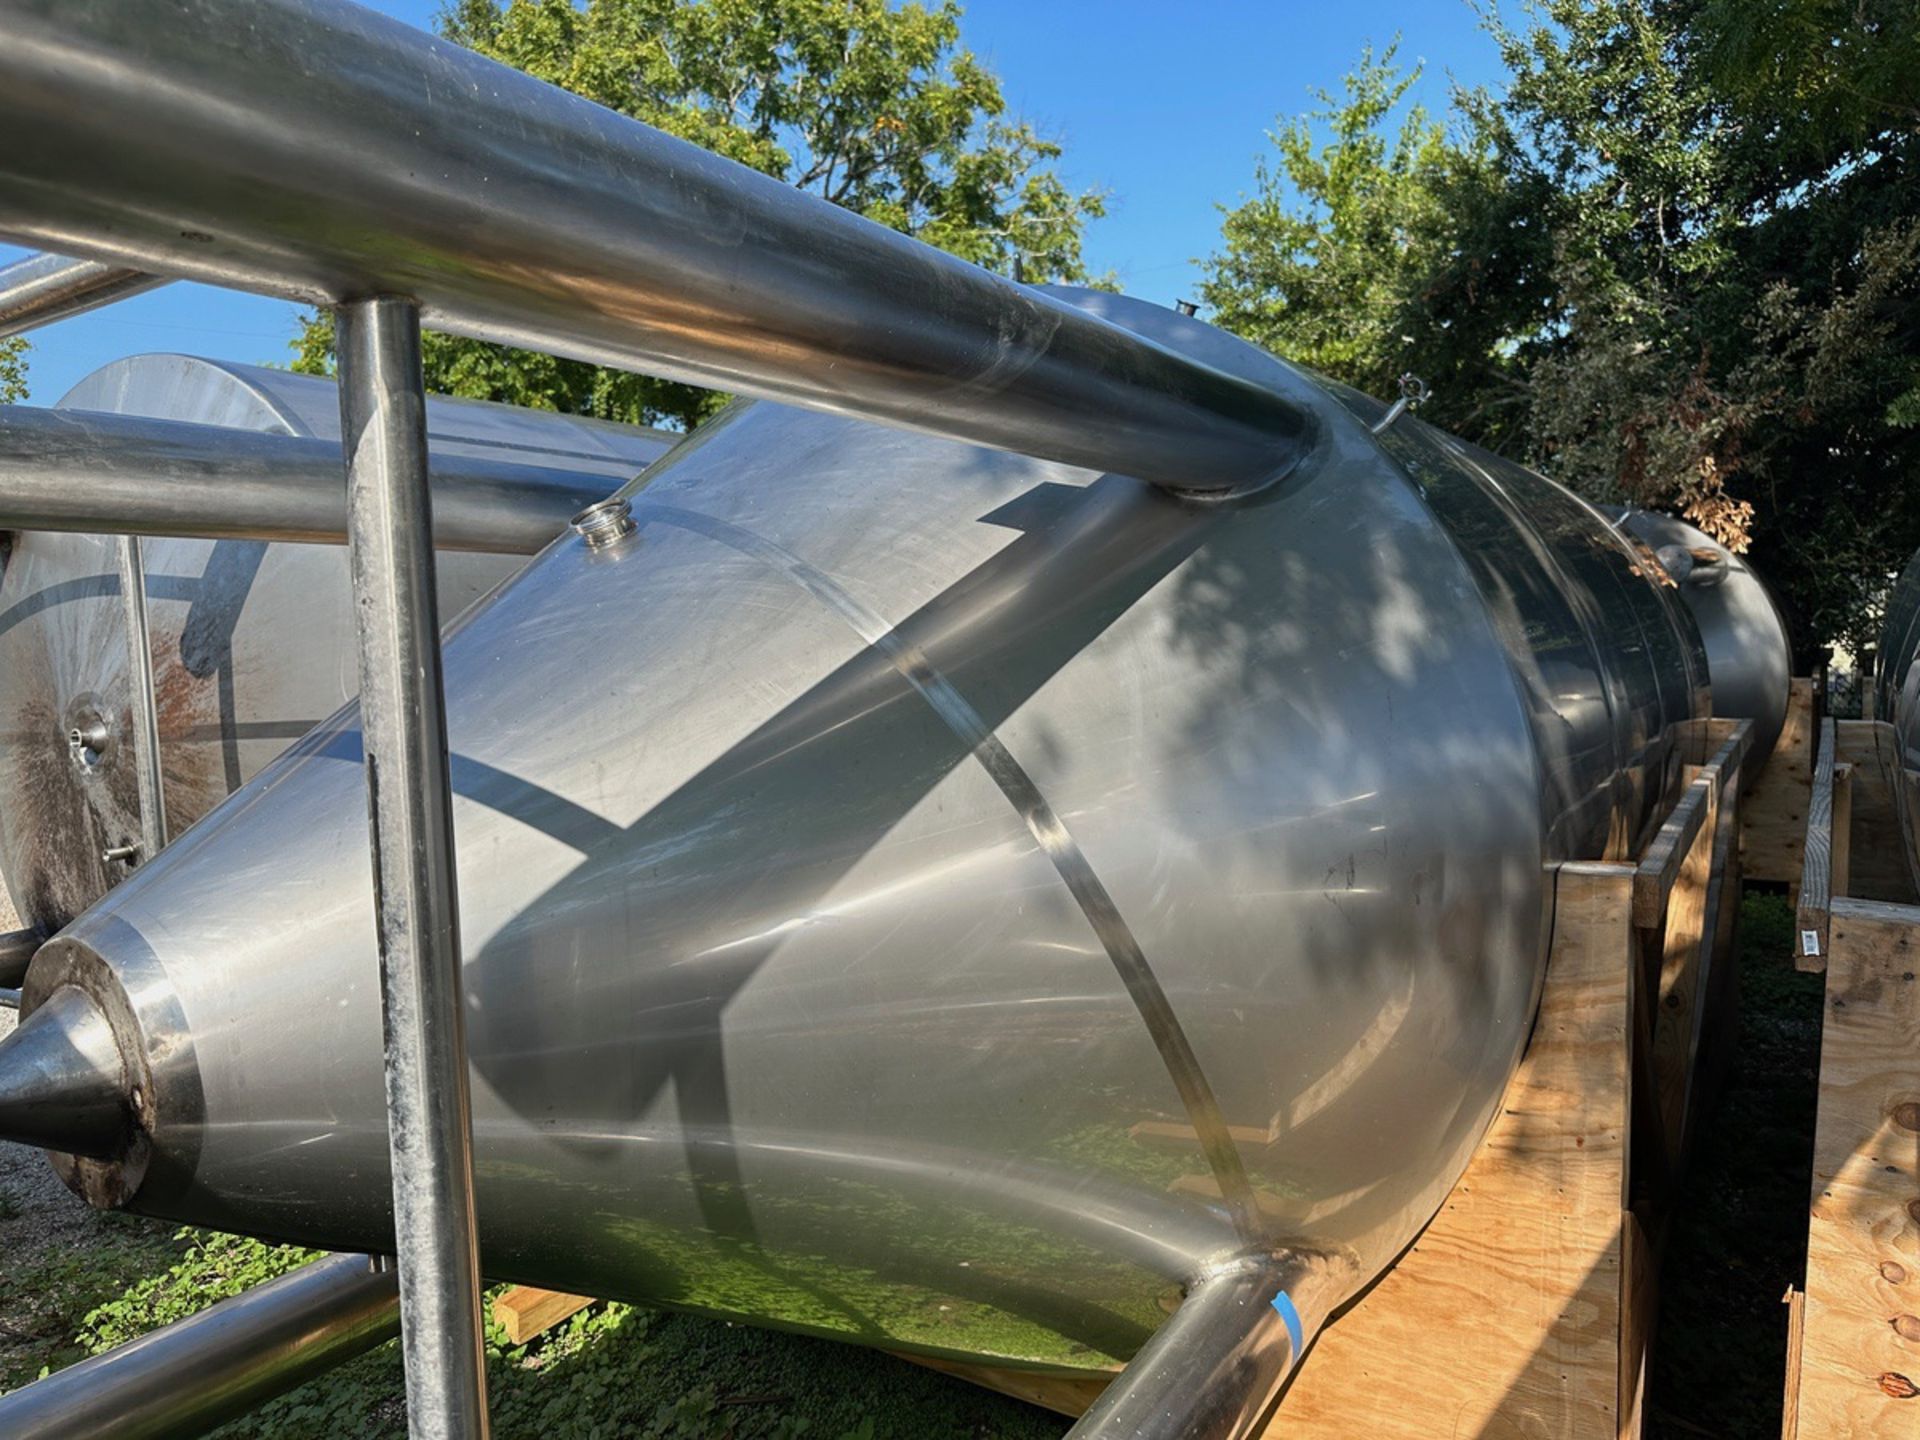 Allied Beverage 120 BBL Stainless Steel Fermentation Tank - Cone Bottom, Glycol Ja | Rig Fee $750 - Image 3 of 5